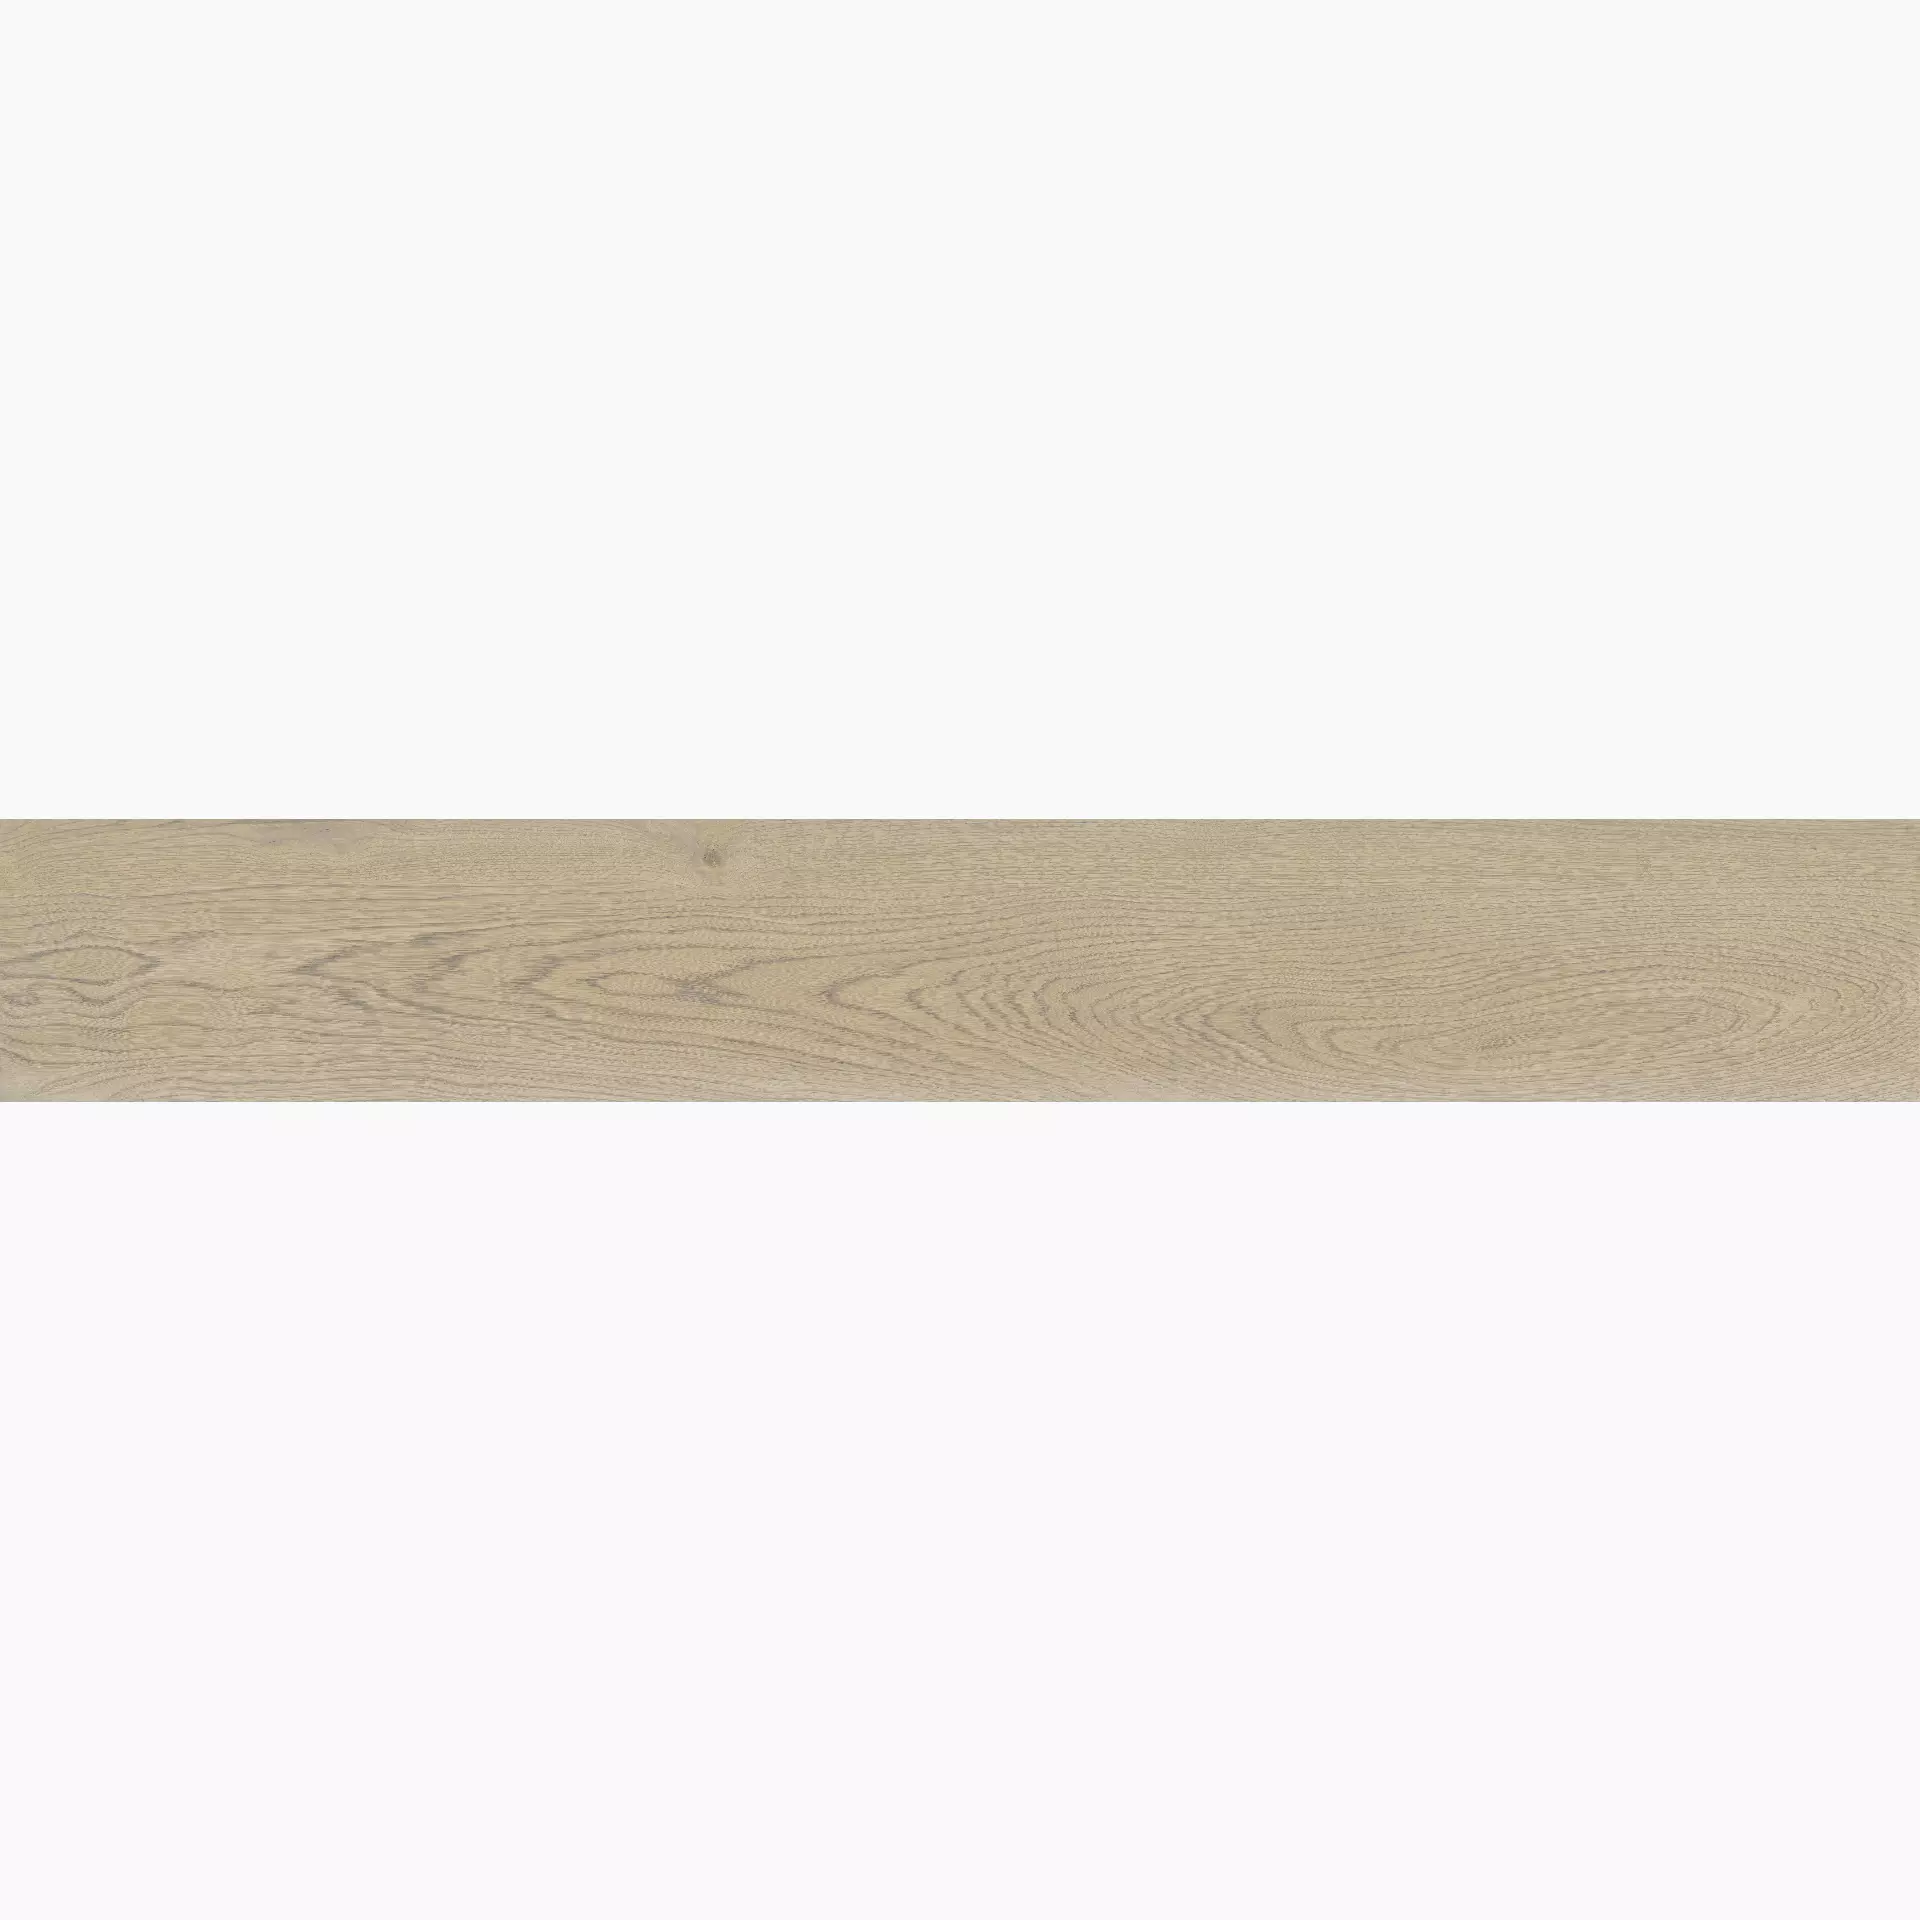 ABK Poetry Wood Gold Naturale PF60010054 26,5x180cm rectified 8,5mm